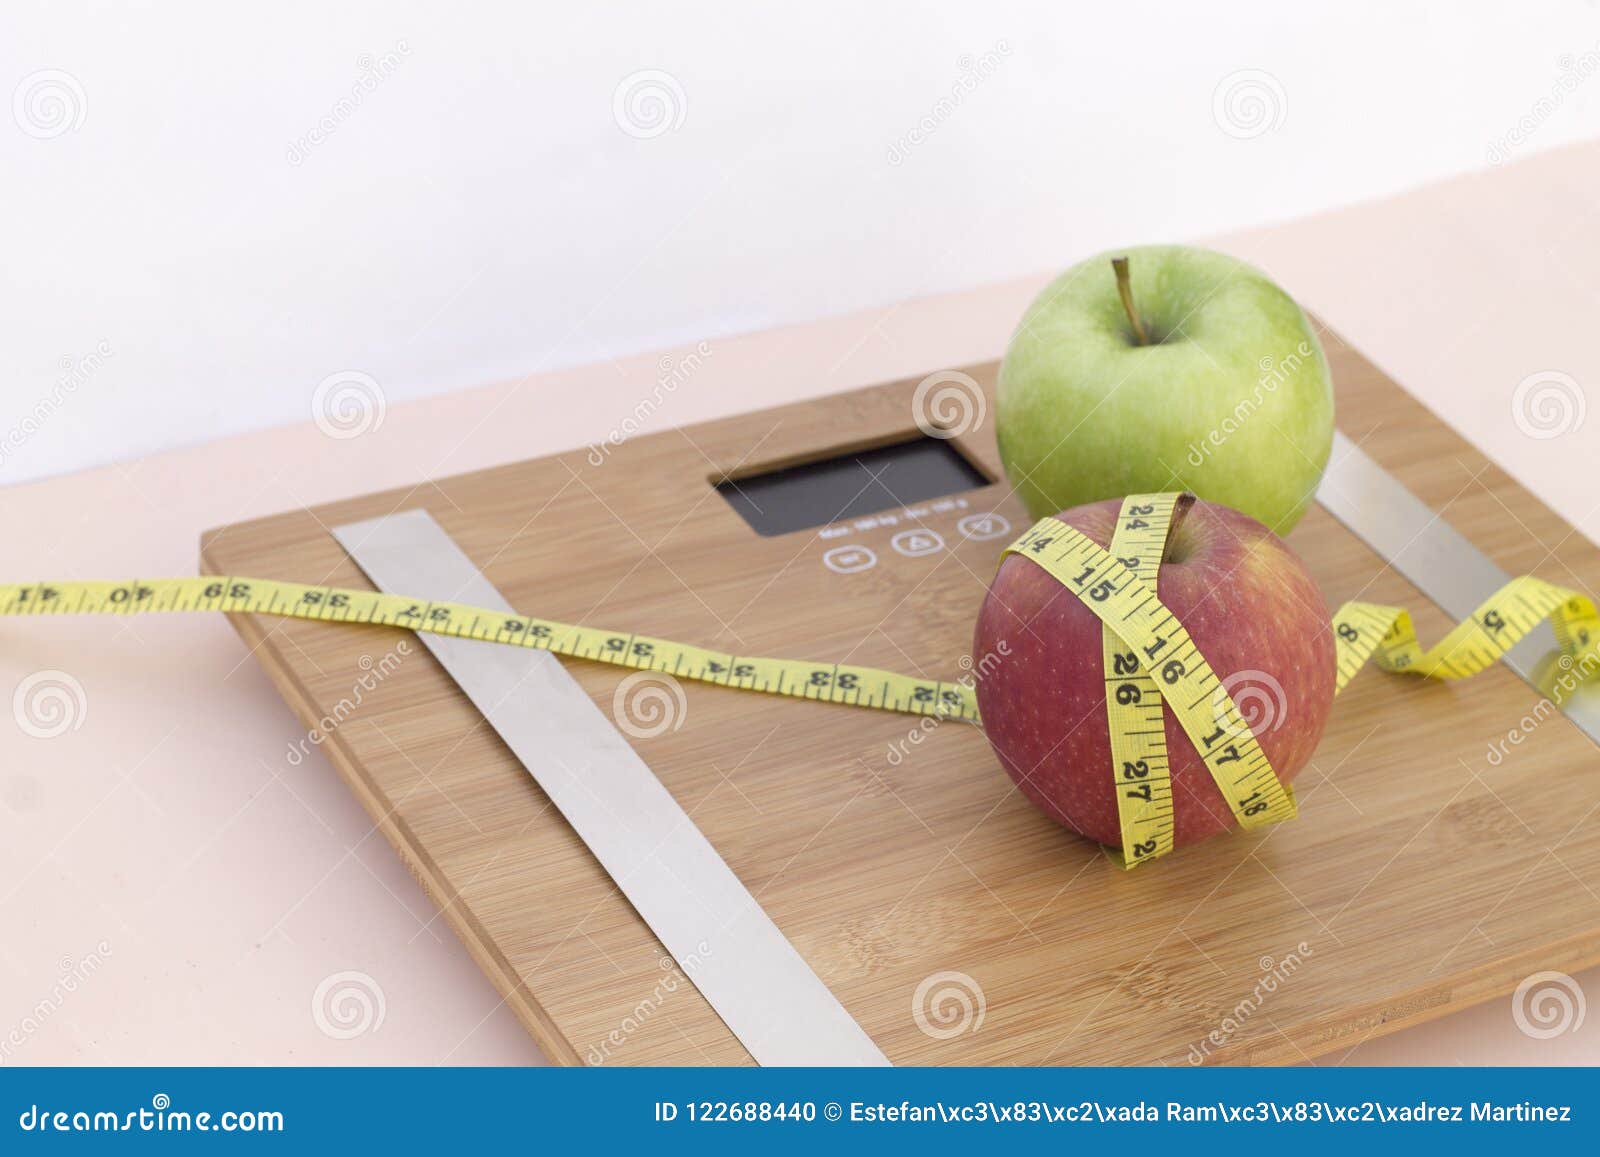 still life photography with two apples, tape mesaure and a scale